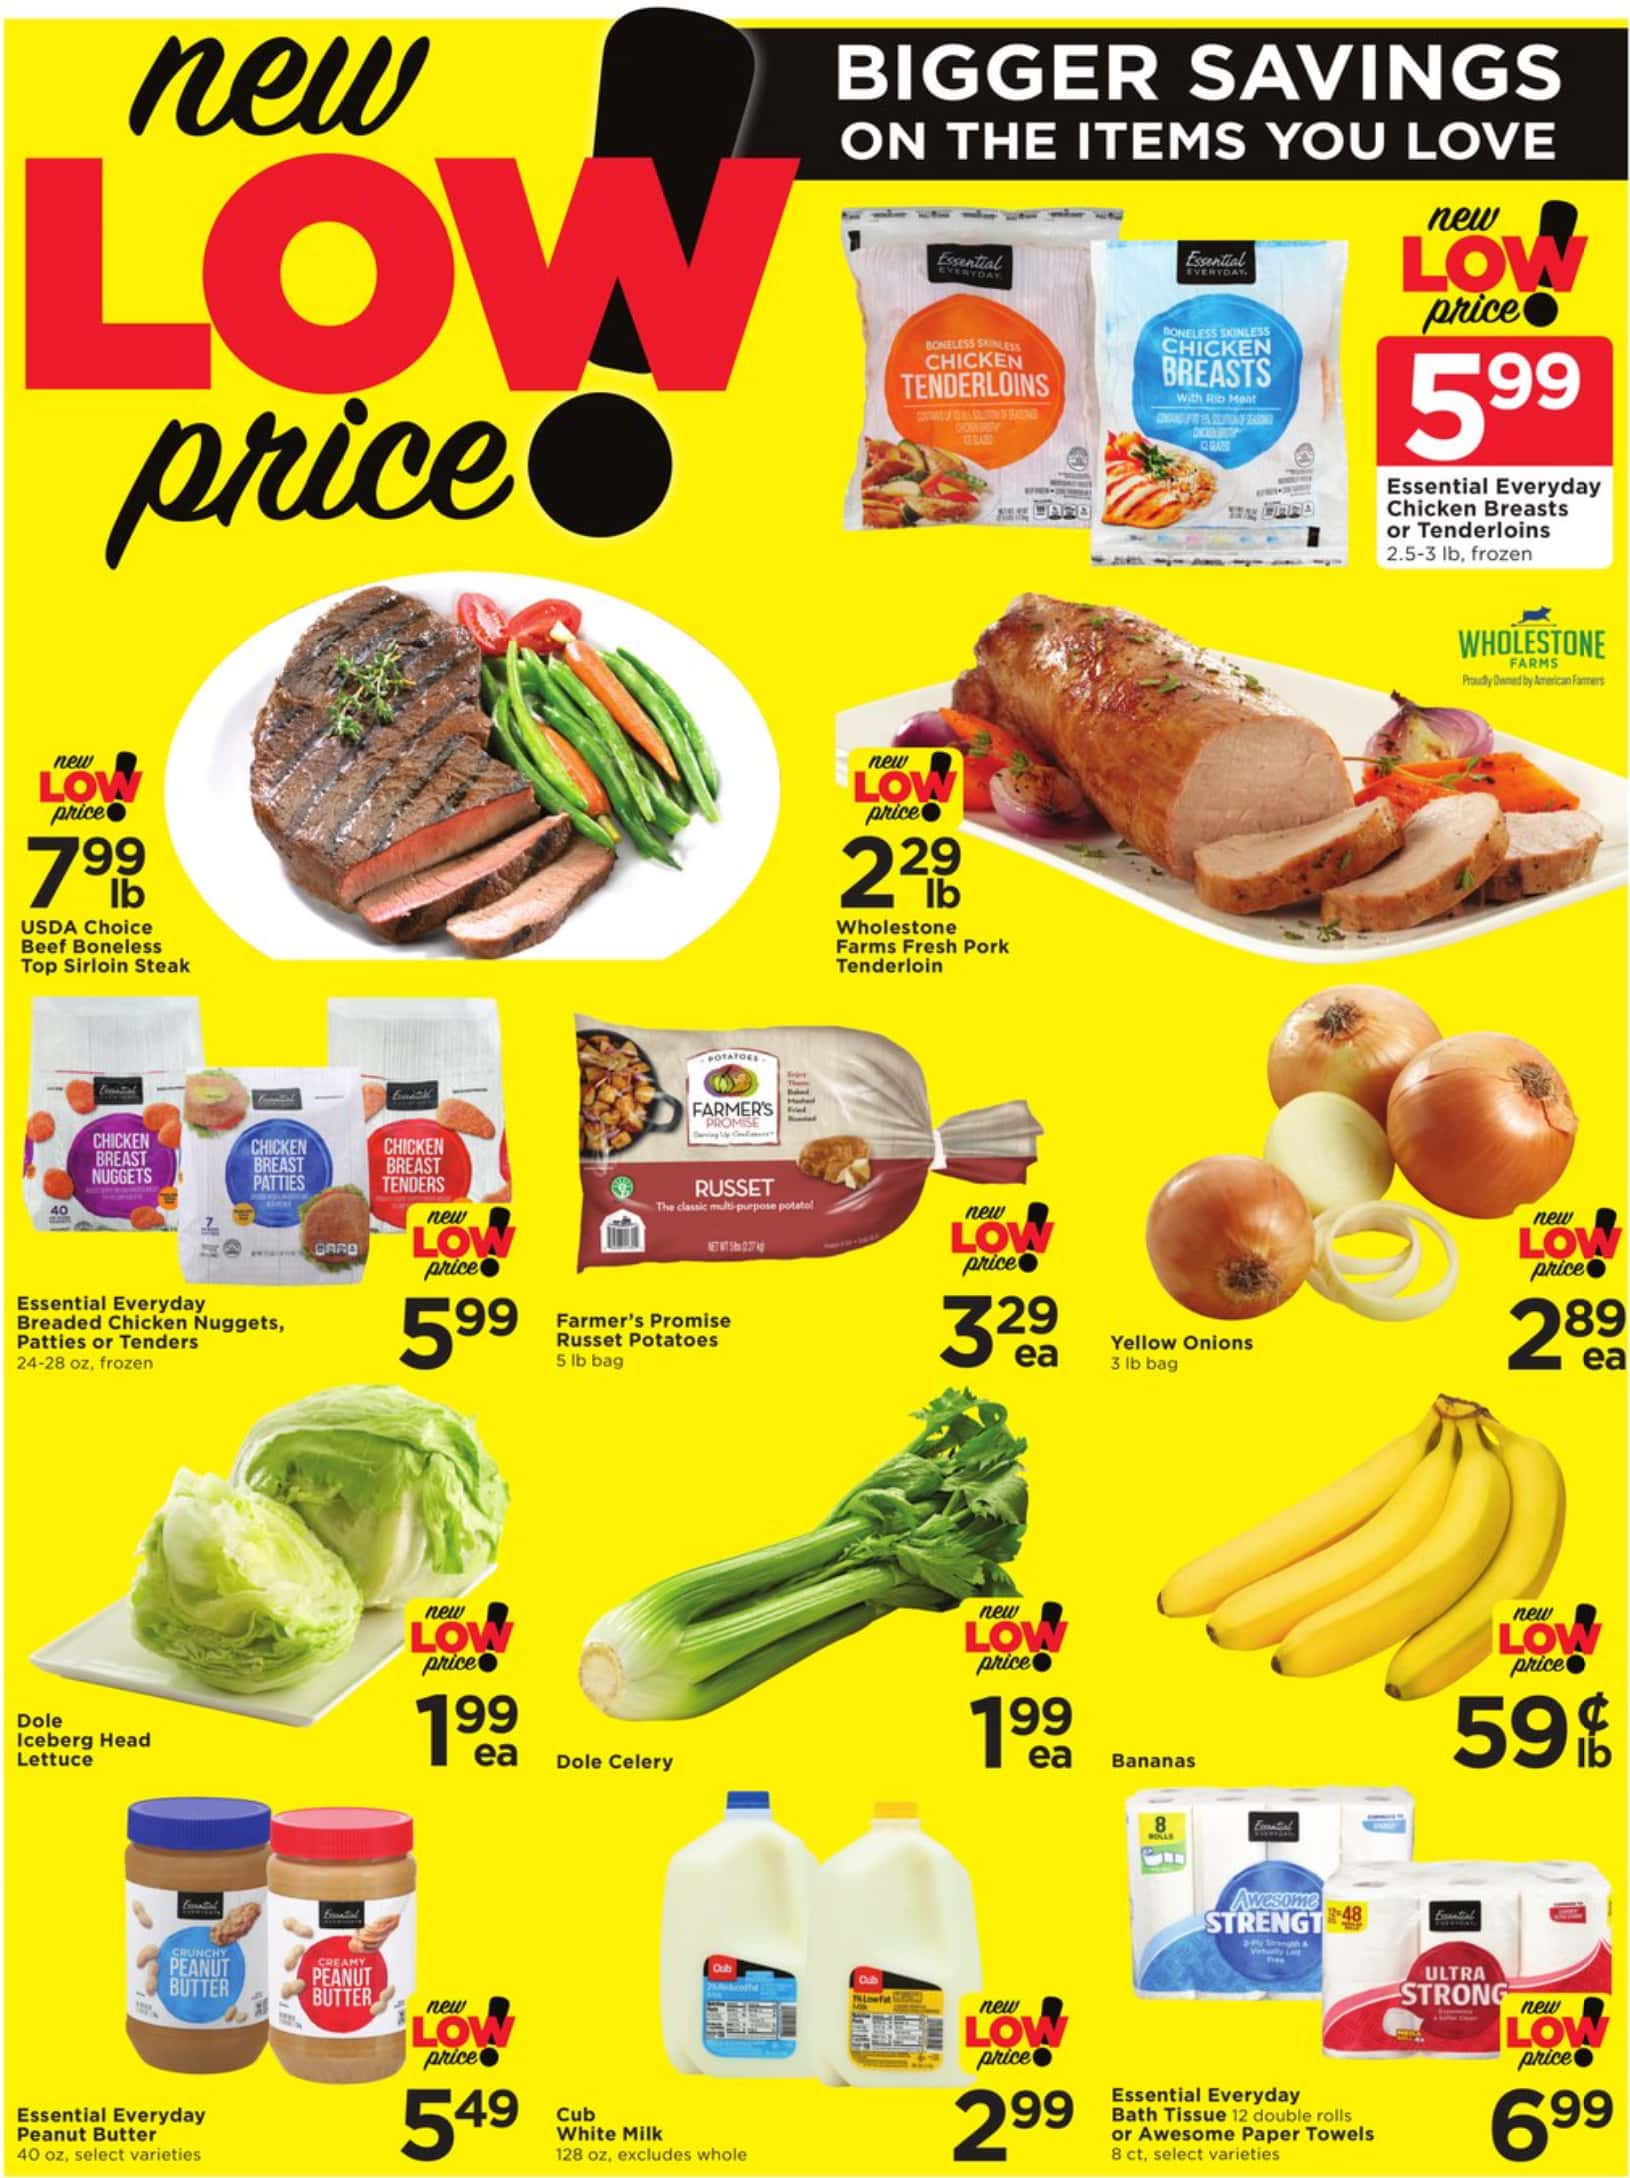 CubFoods_weekly_ad_041424_02